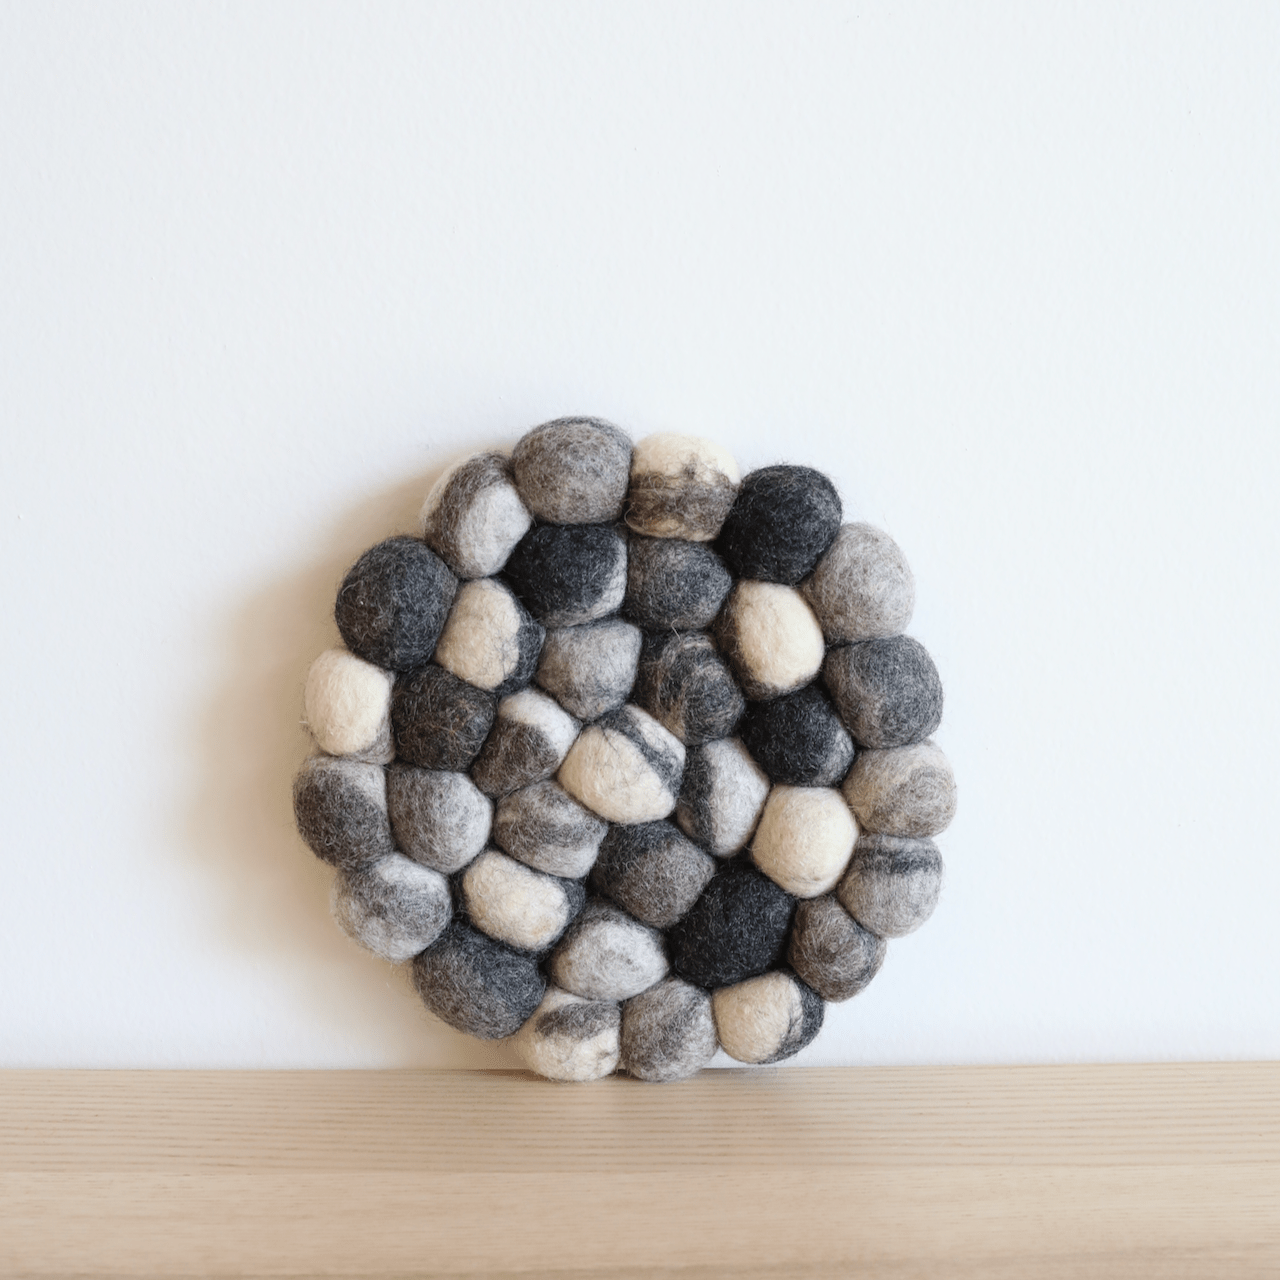 Gray Pebble-Stone like wool felt placemat Premium Quality Unique Handmade Gifts And Accessories